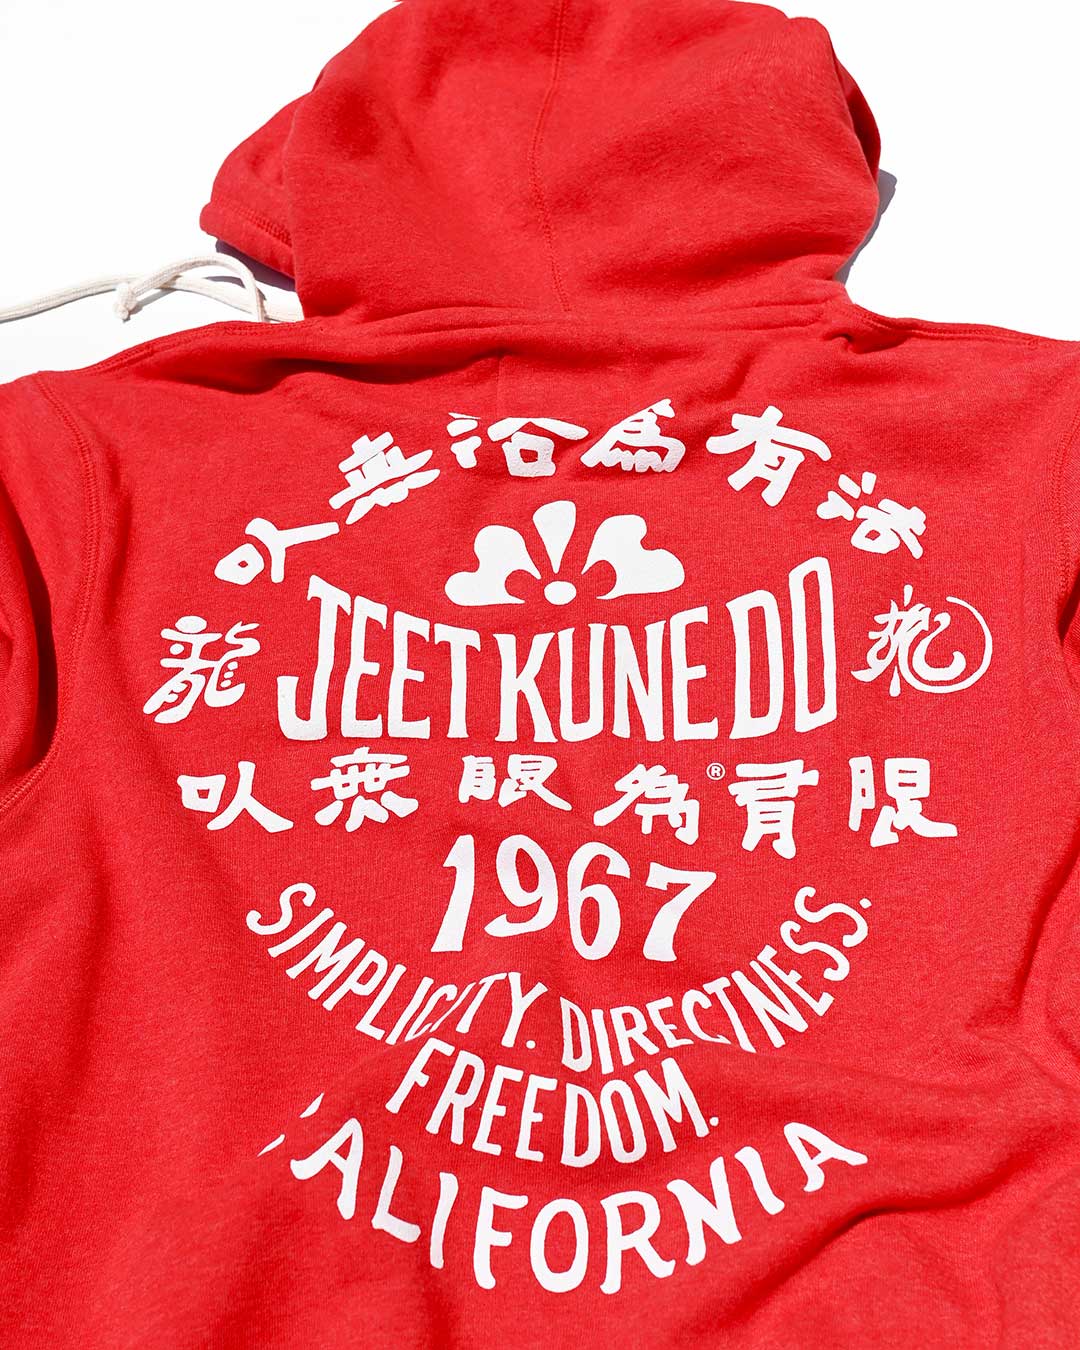 Bruce Lee JKD 1967 Red PO Hoody - Roots of Fight Canada